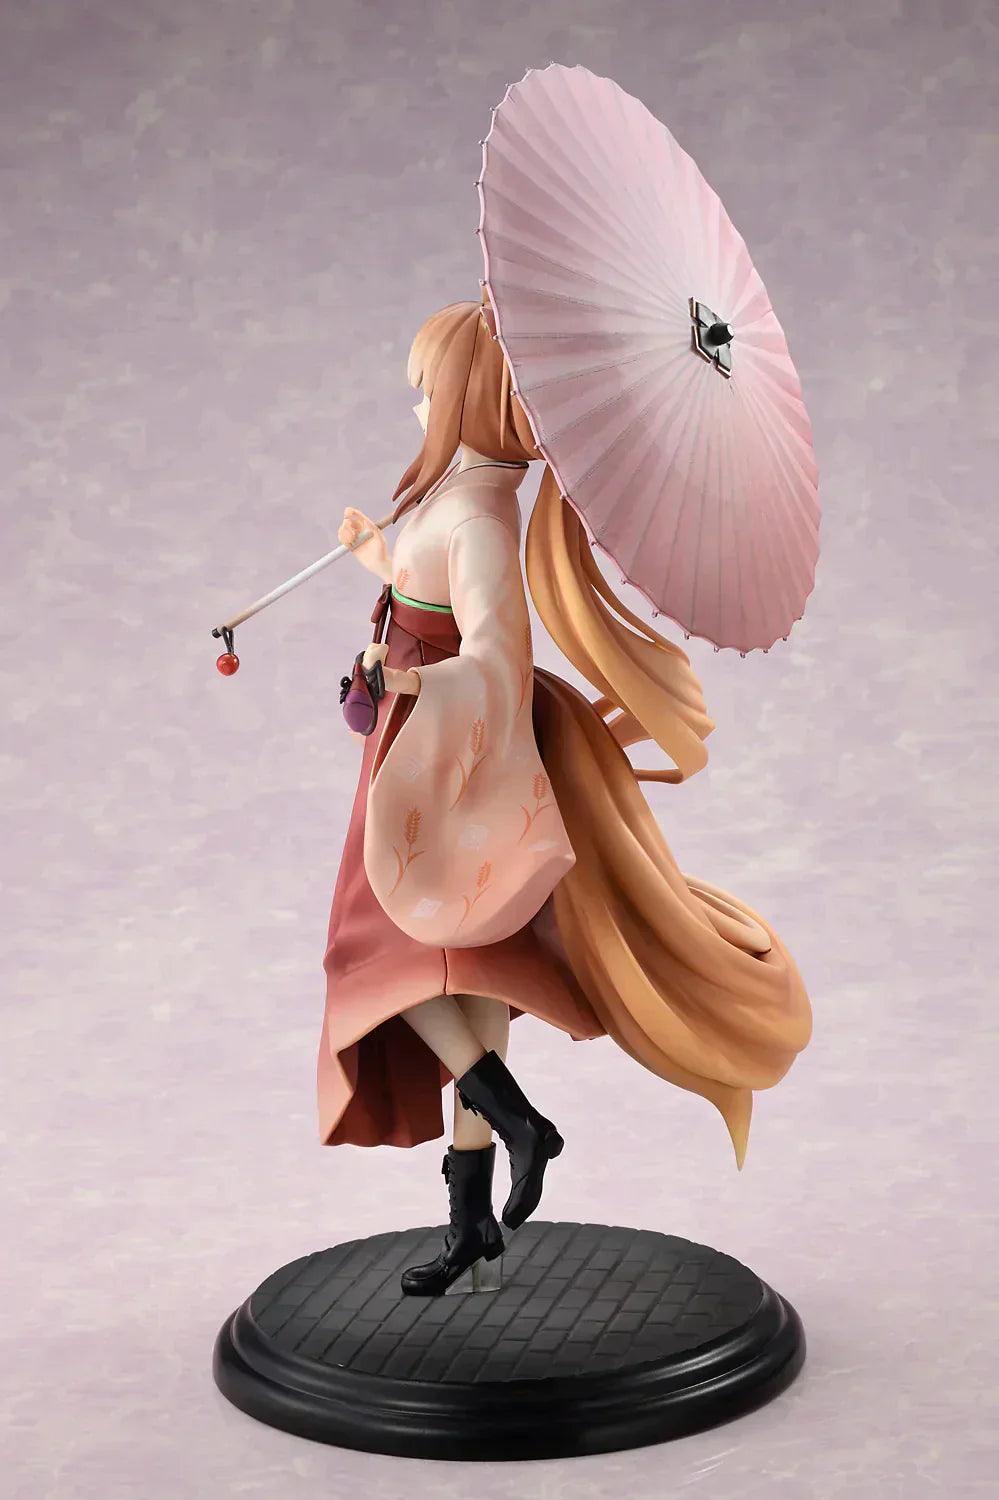 Spice and Wolf - Holo 1/6 Scale Figure (Hakama ver.) - The Card Vault